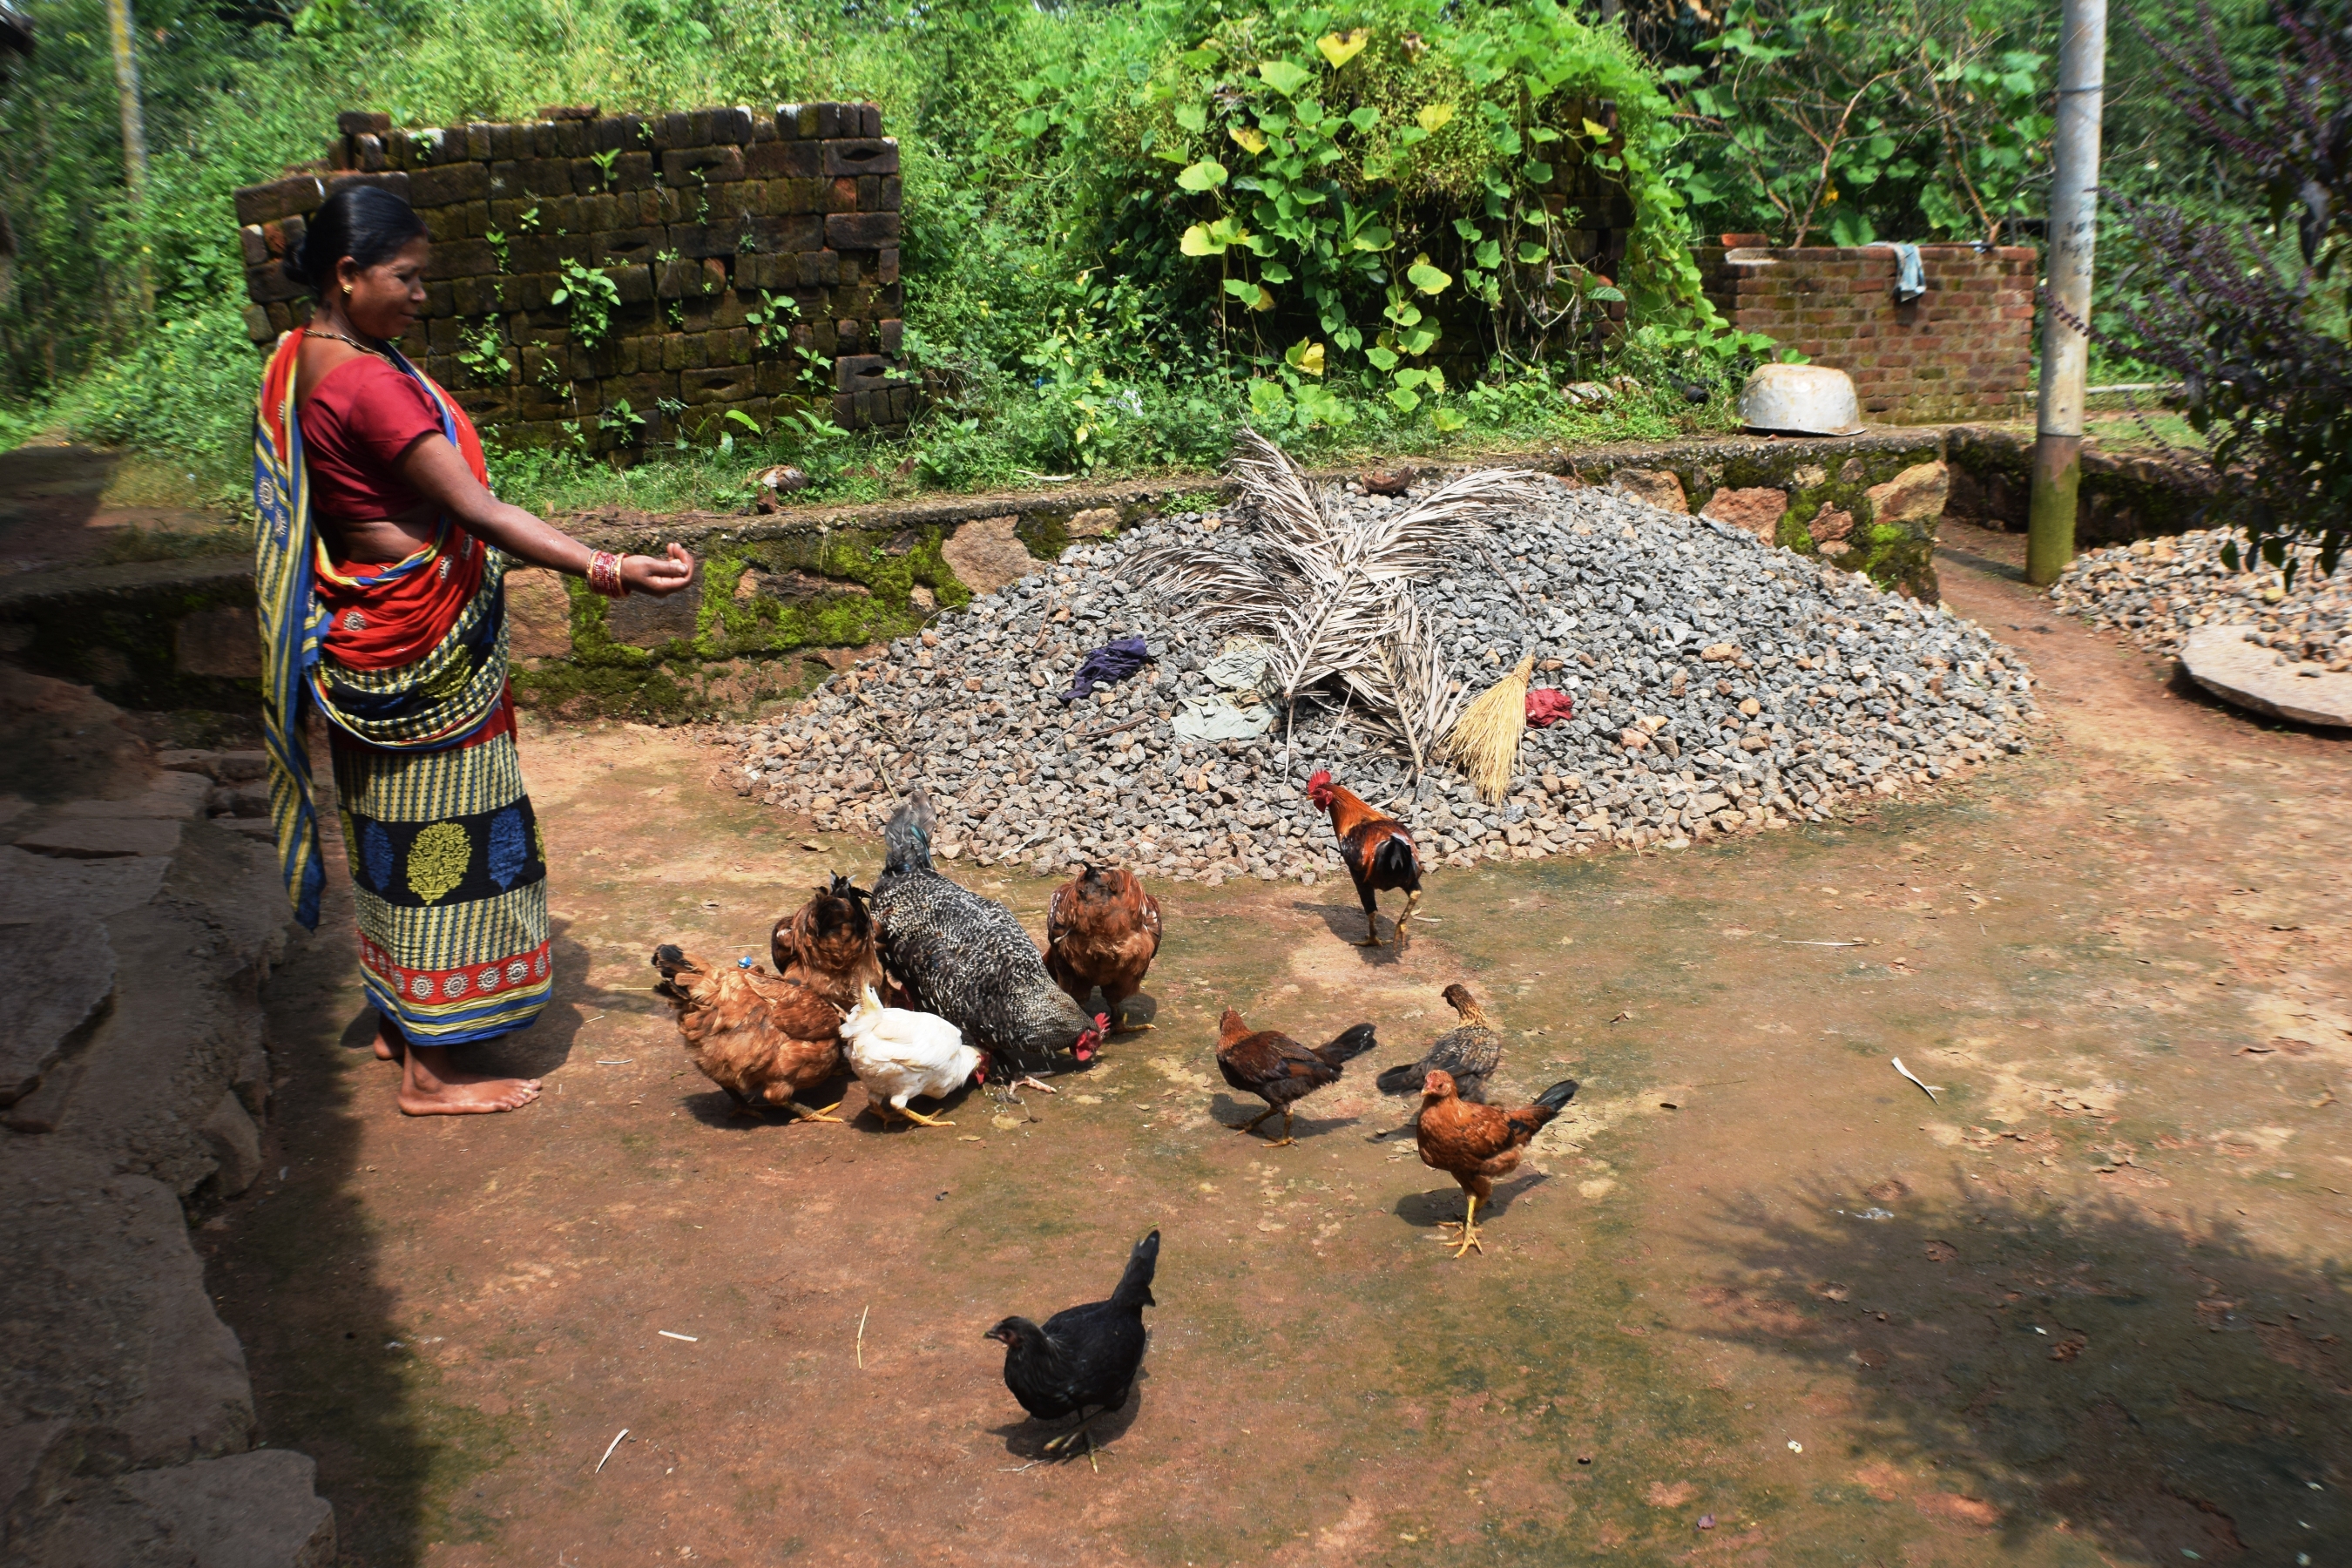 a woman wearing a magenta robe feeds chickens in the yard